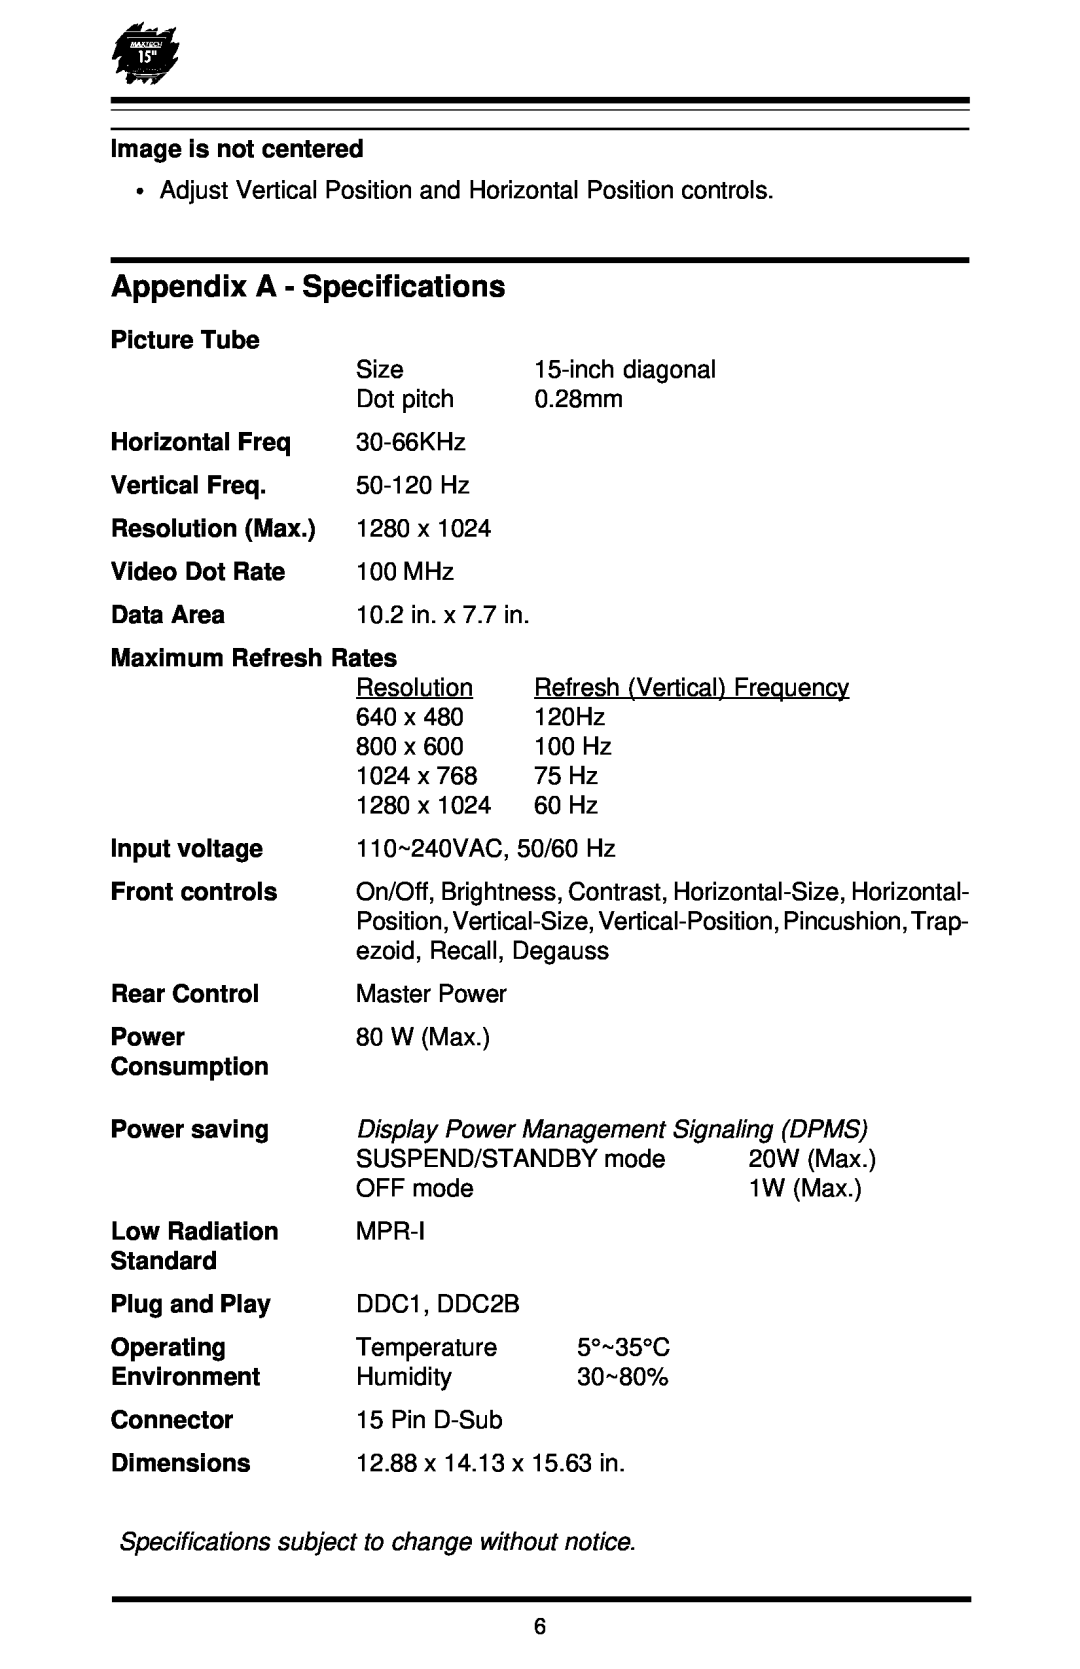 MaxTech XT-5871 user manual Appendix A - Specifications, Display Power Management Signaling DPMS 